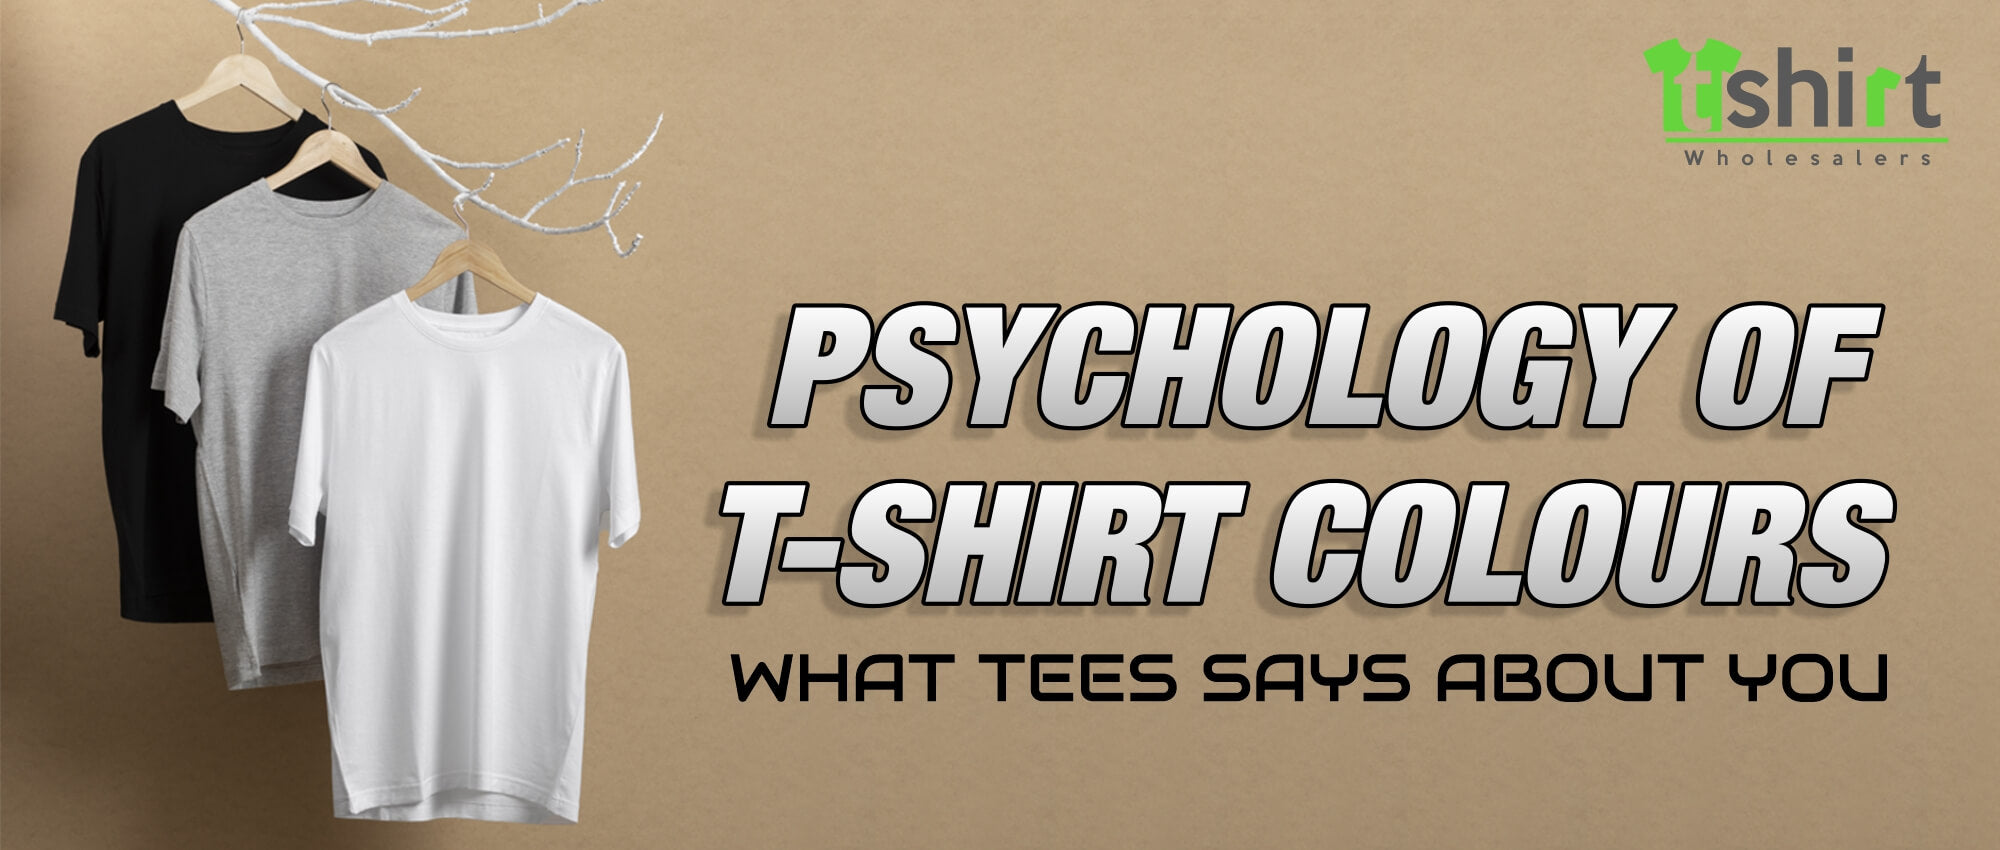 PSYCHOLOGY OF T-SHIRT COLOURS: WHAT TEES SAYS ABOUT YOU